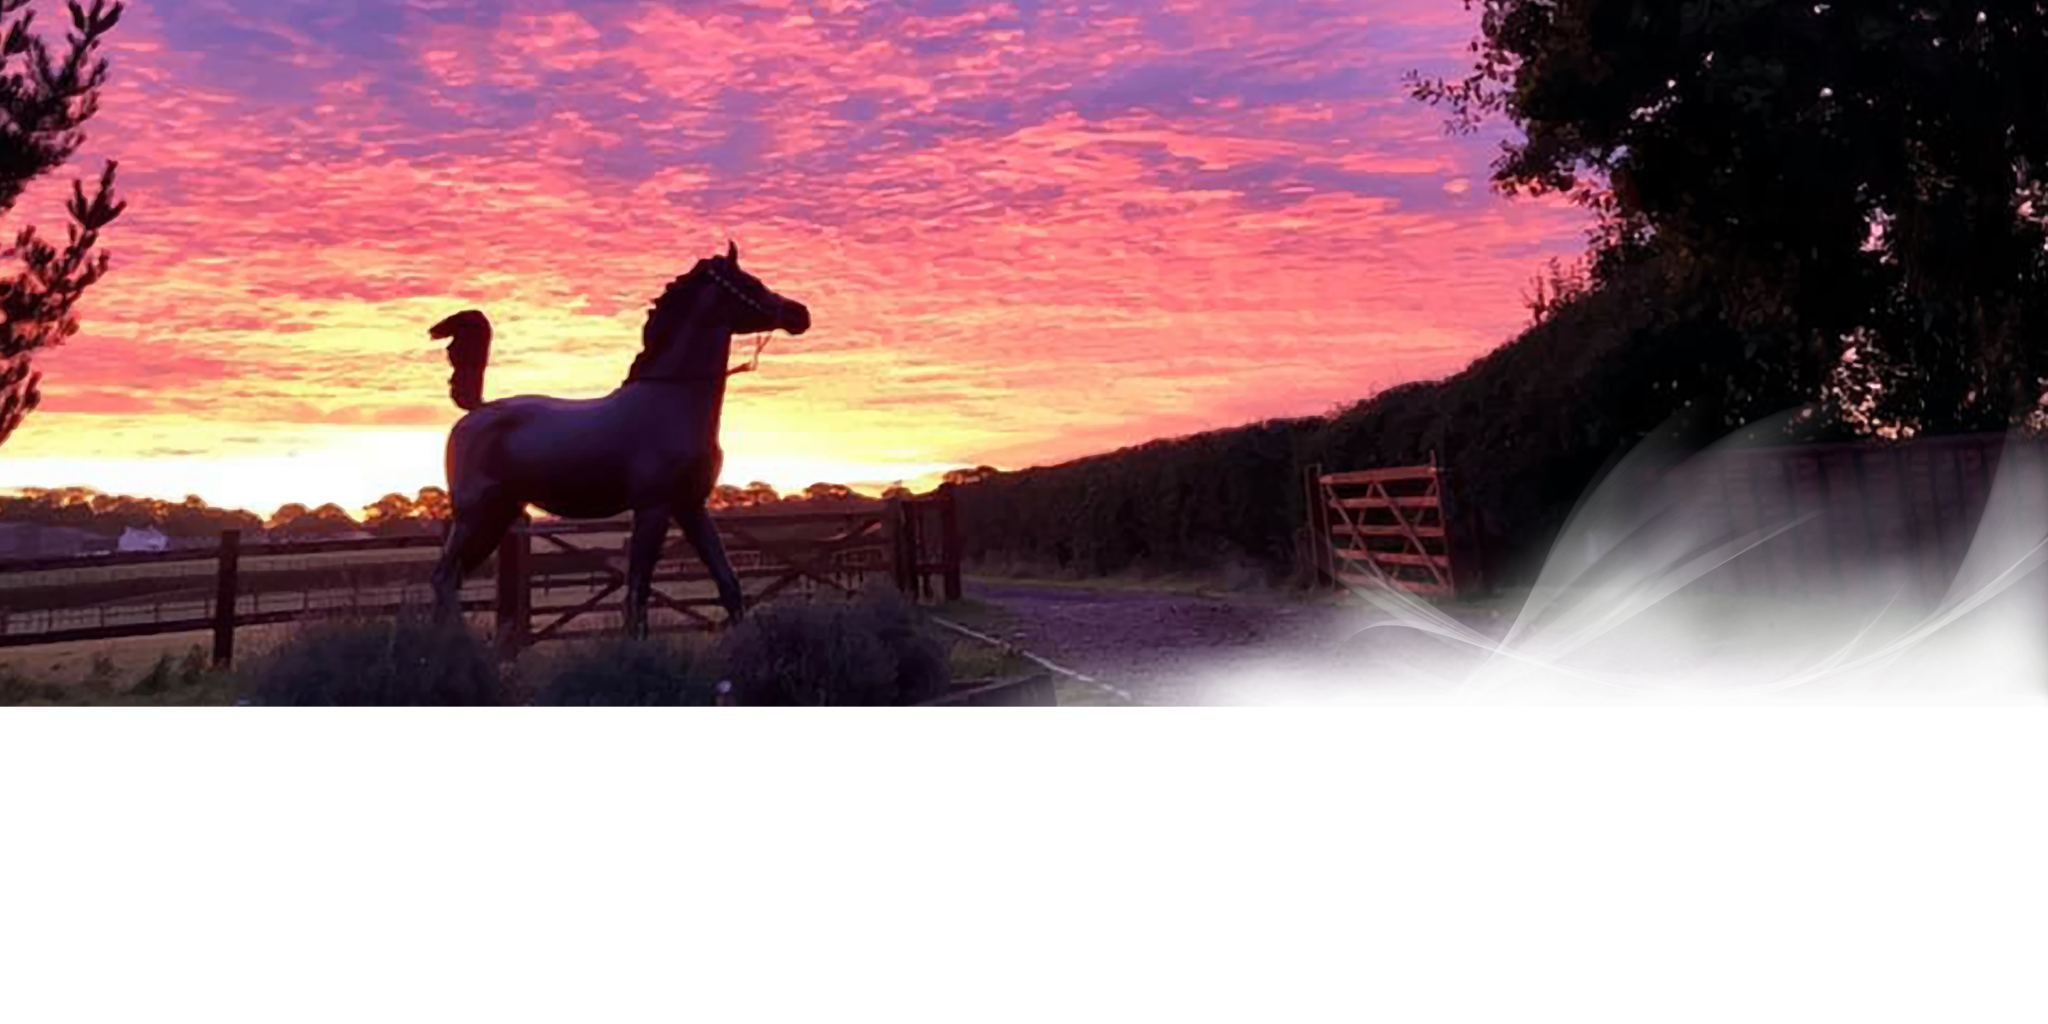 Sunset with bronze statue of arabian foal